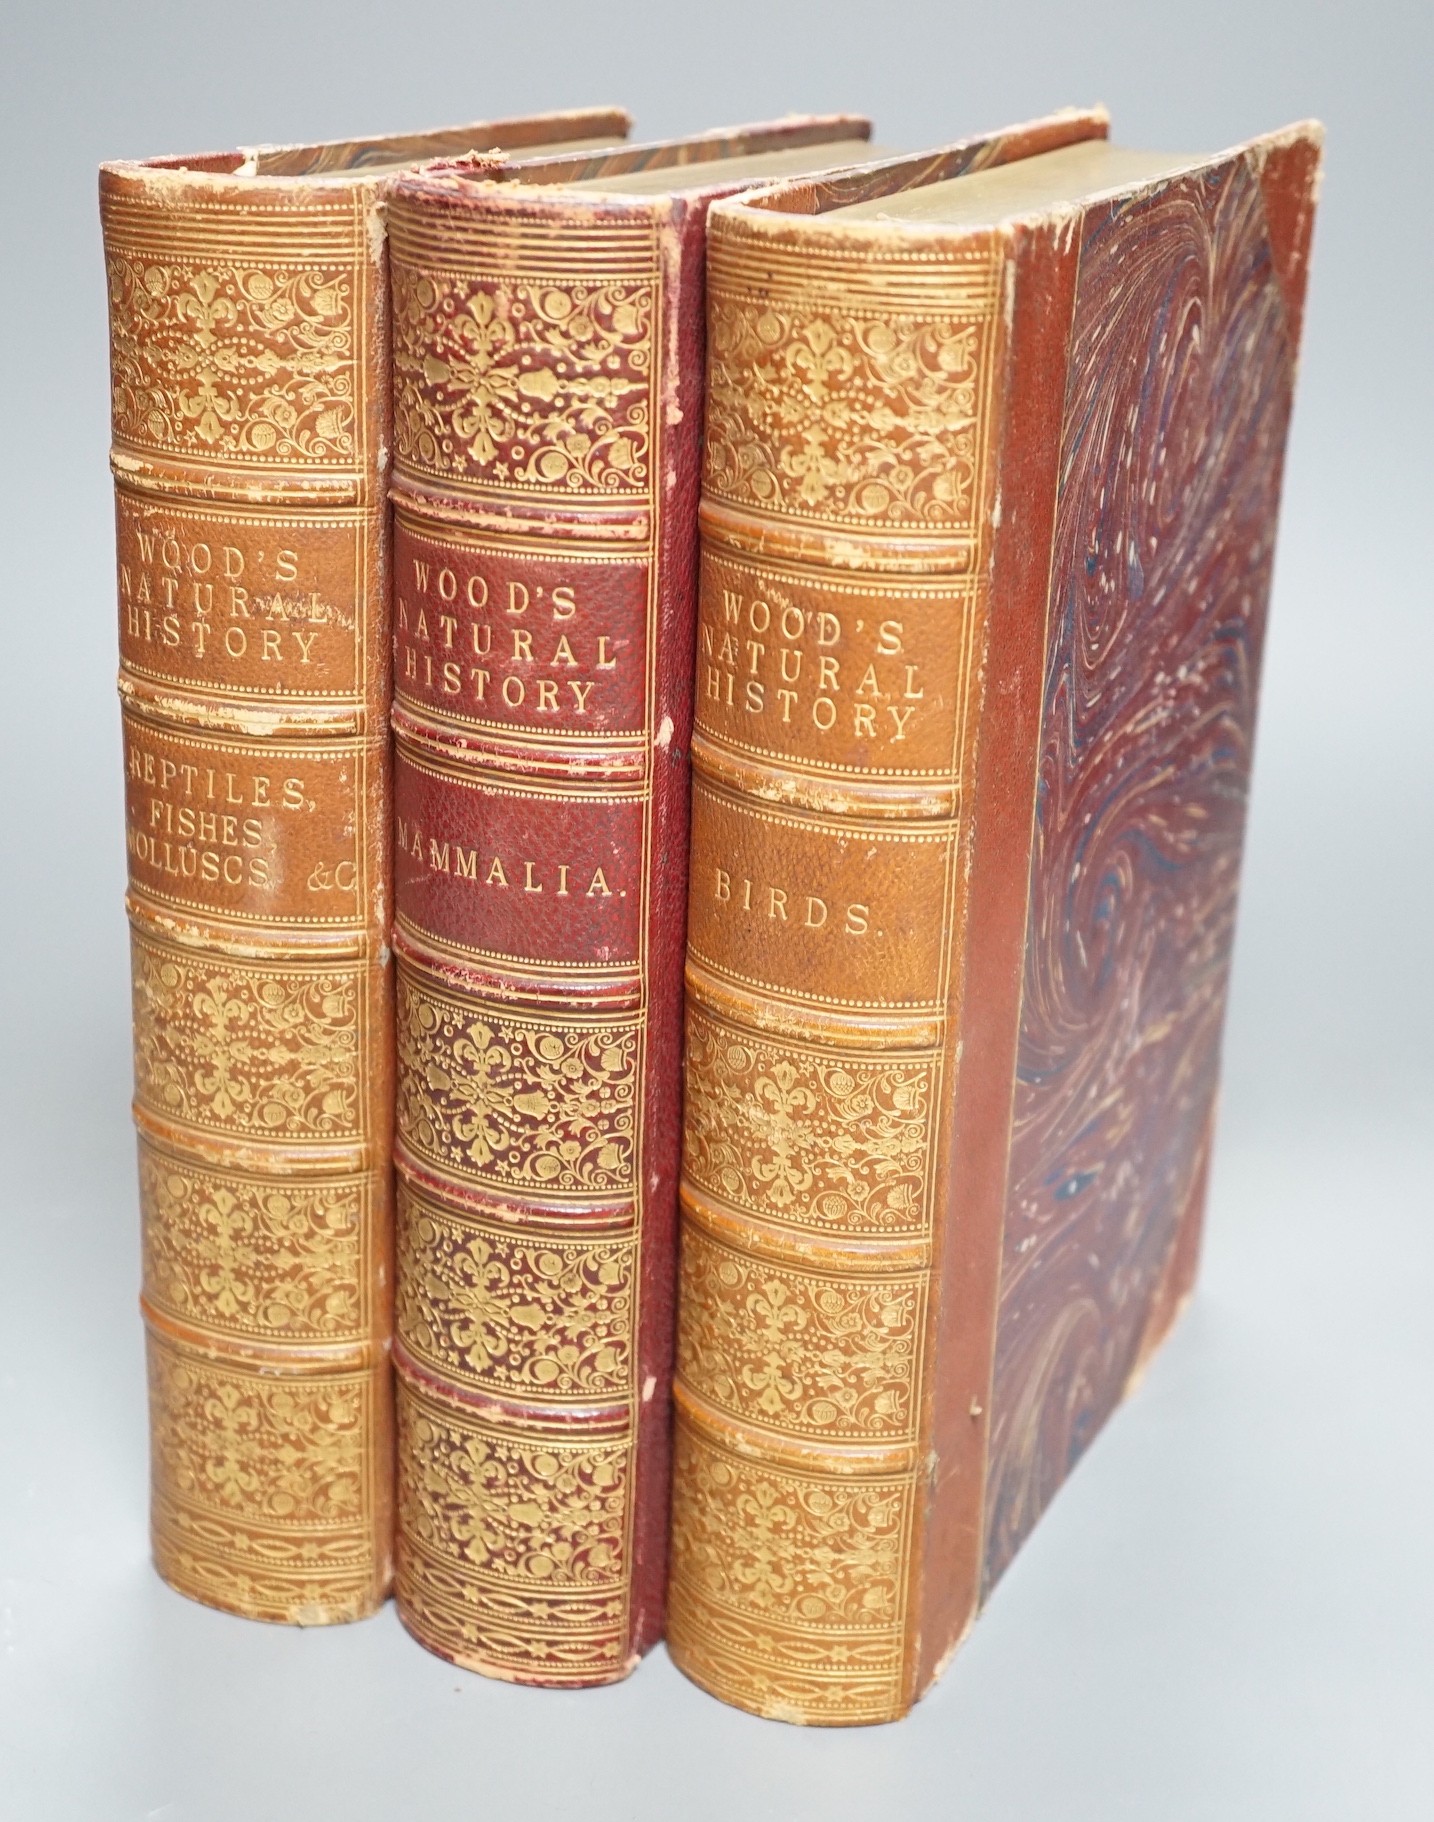 ° ° Wood, Rev. J.G. - The Illustrated Natural History, 3 vols. many engraved illus.; contemp. red